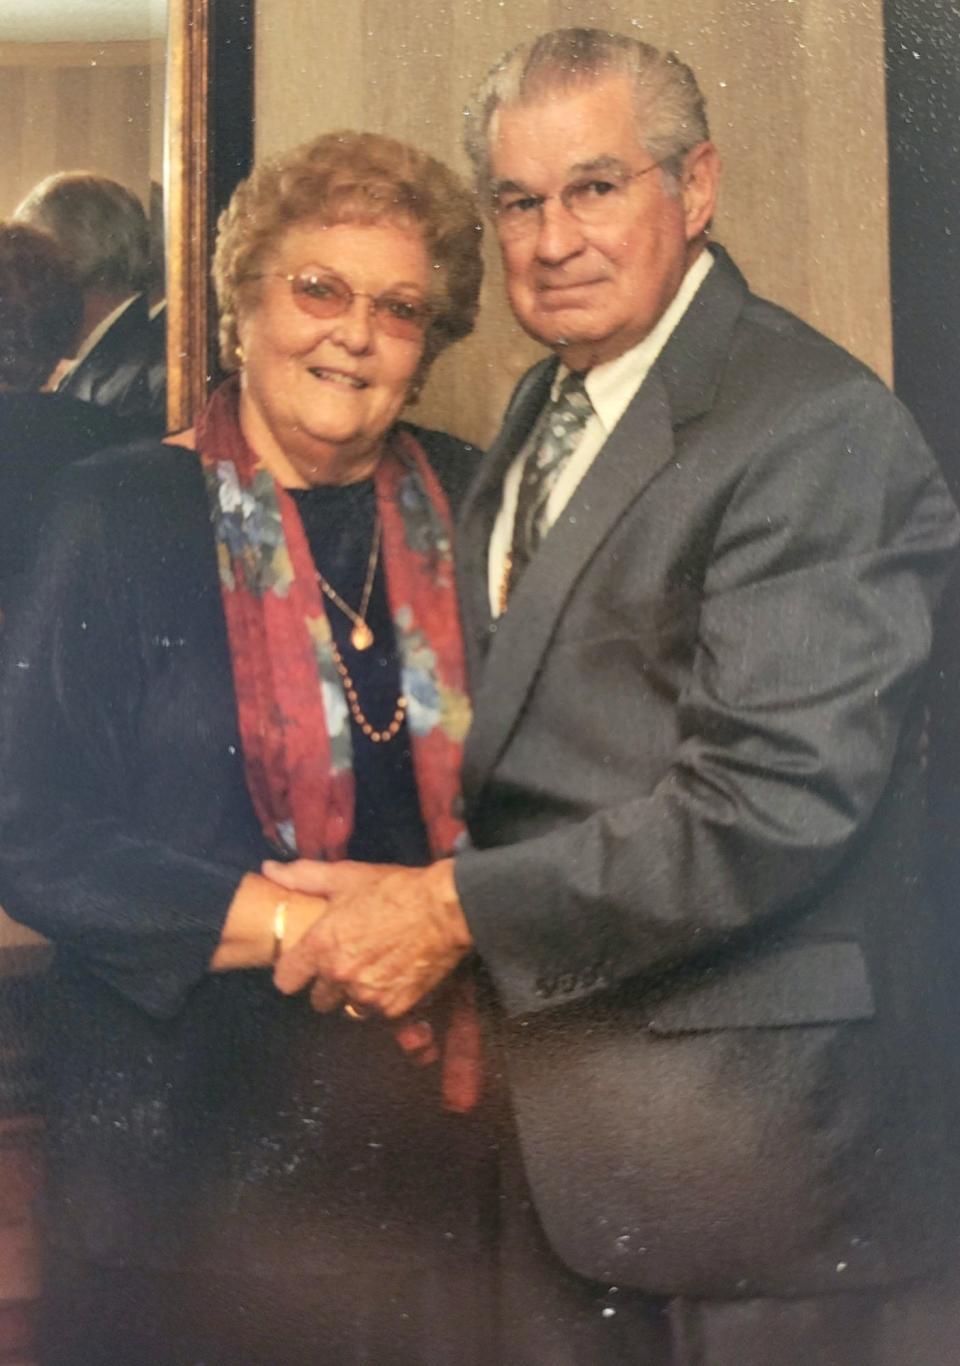 Ted and Janice Reeder danced and taught dance classes in the 1960's and 1970's in the Hagerstown area.